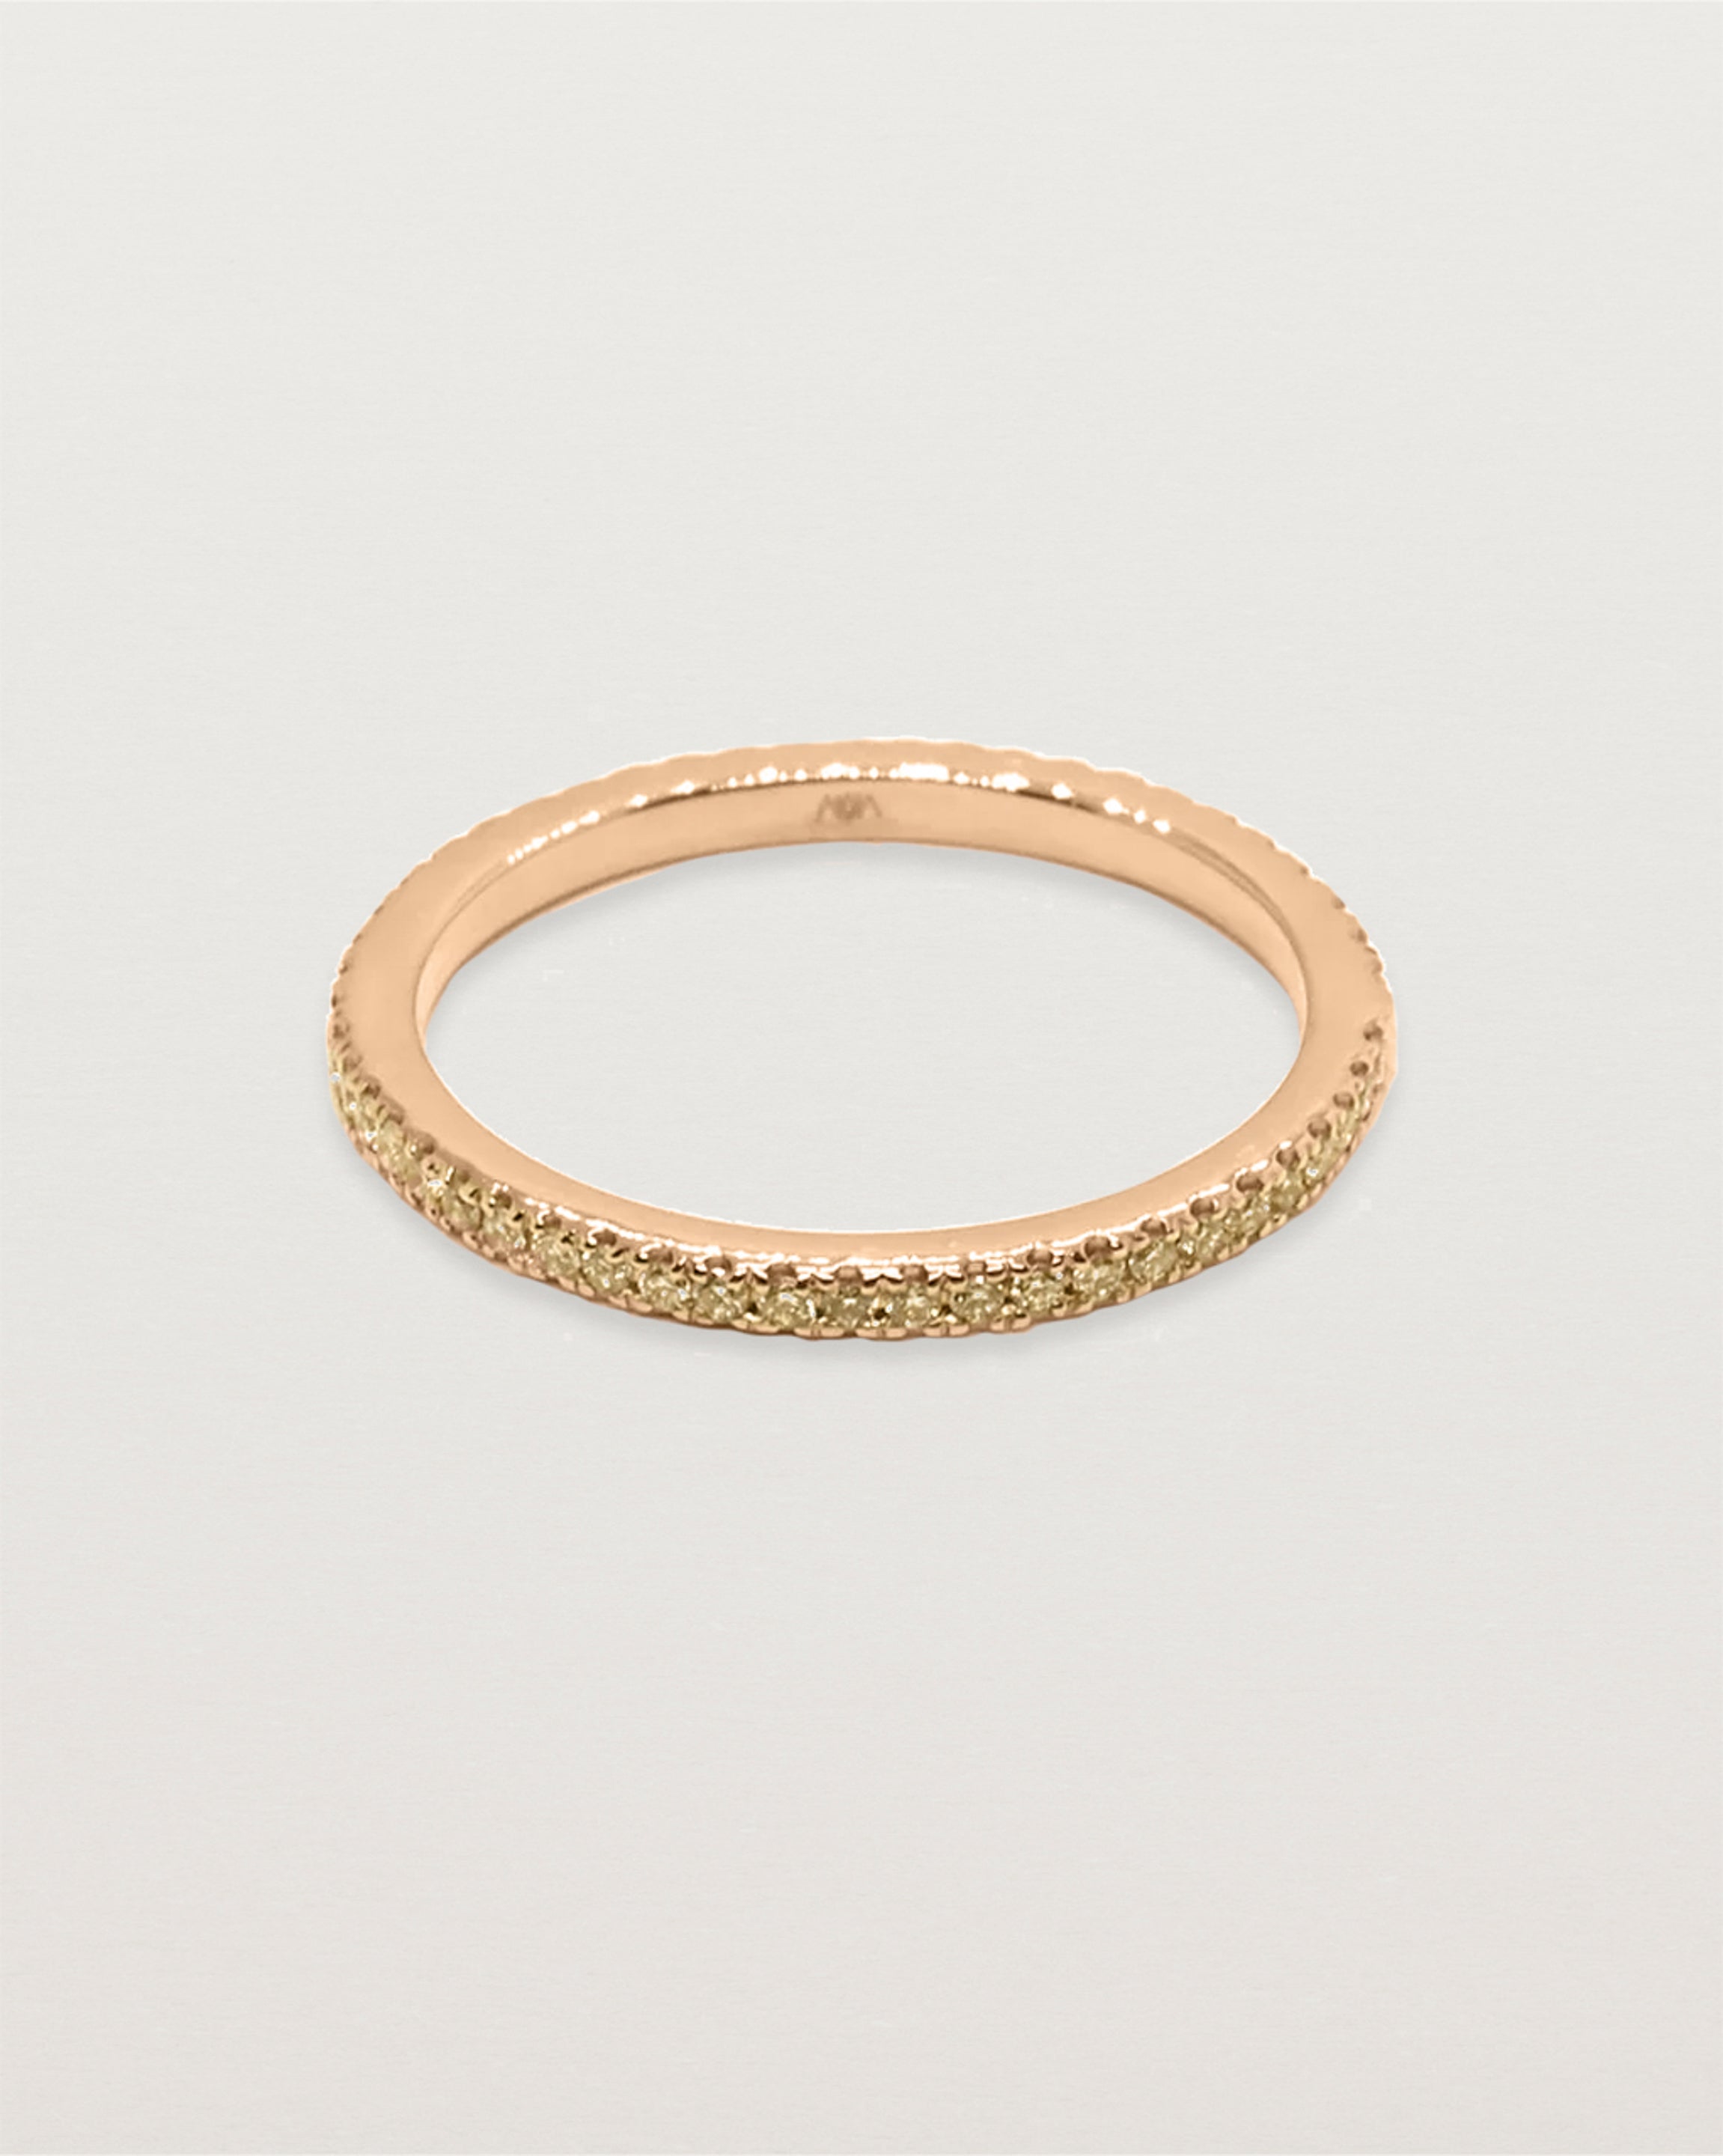 rose gold band featuring micro pave champagne diamonds